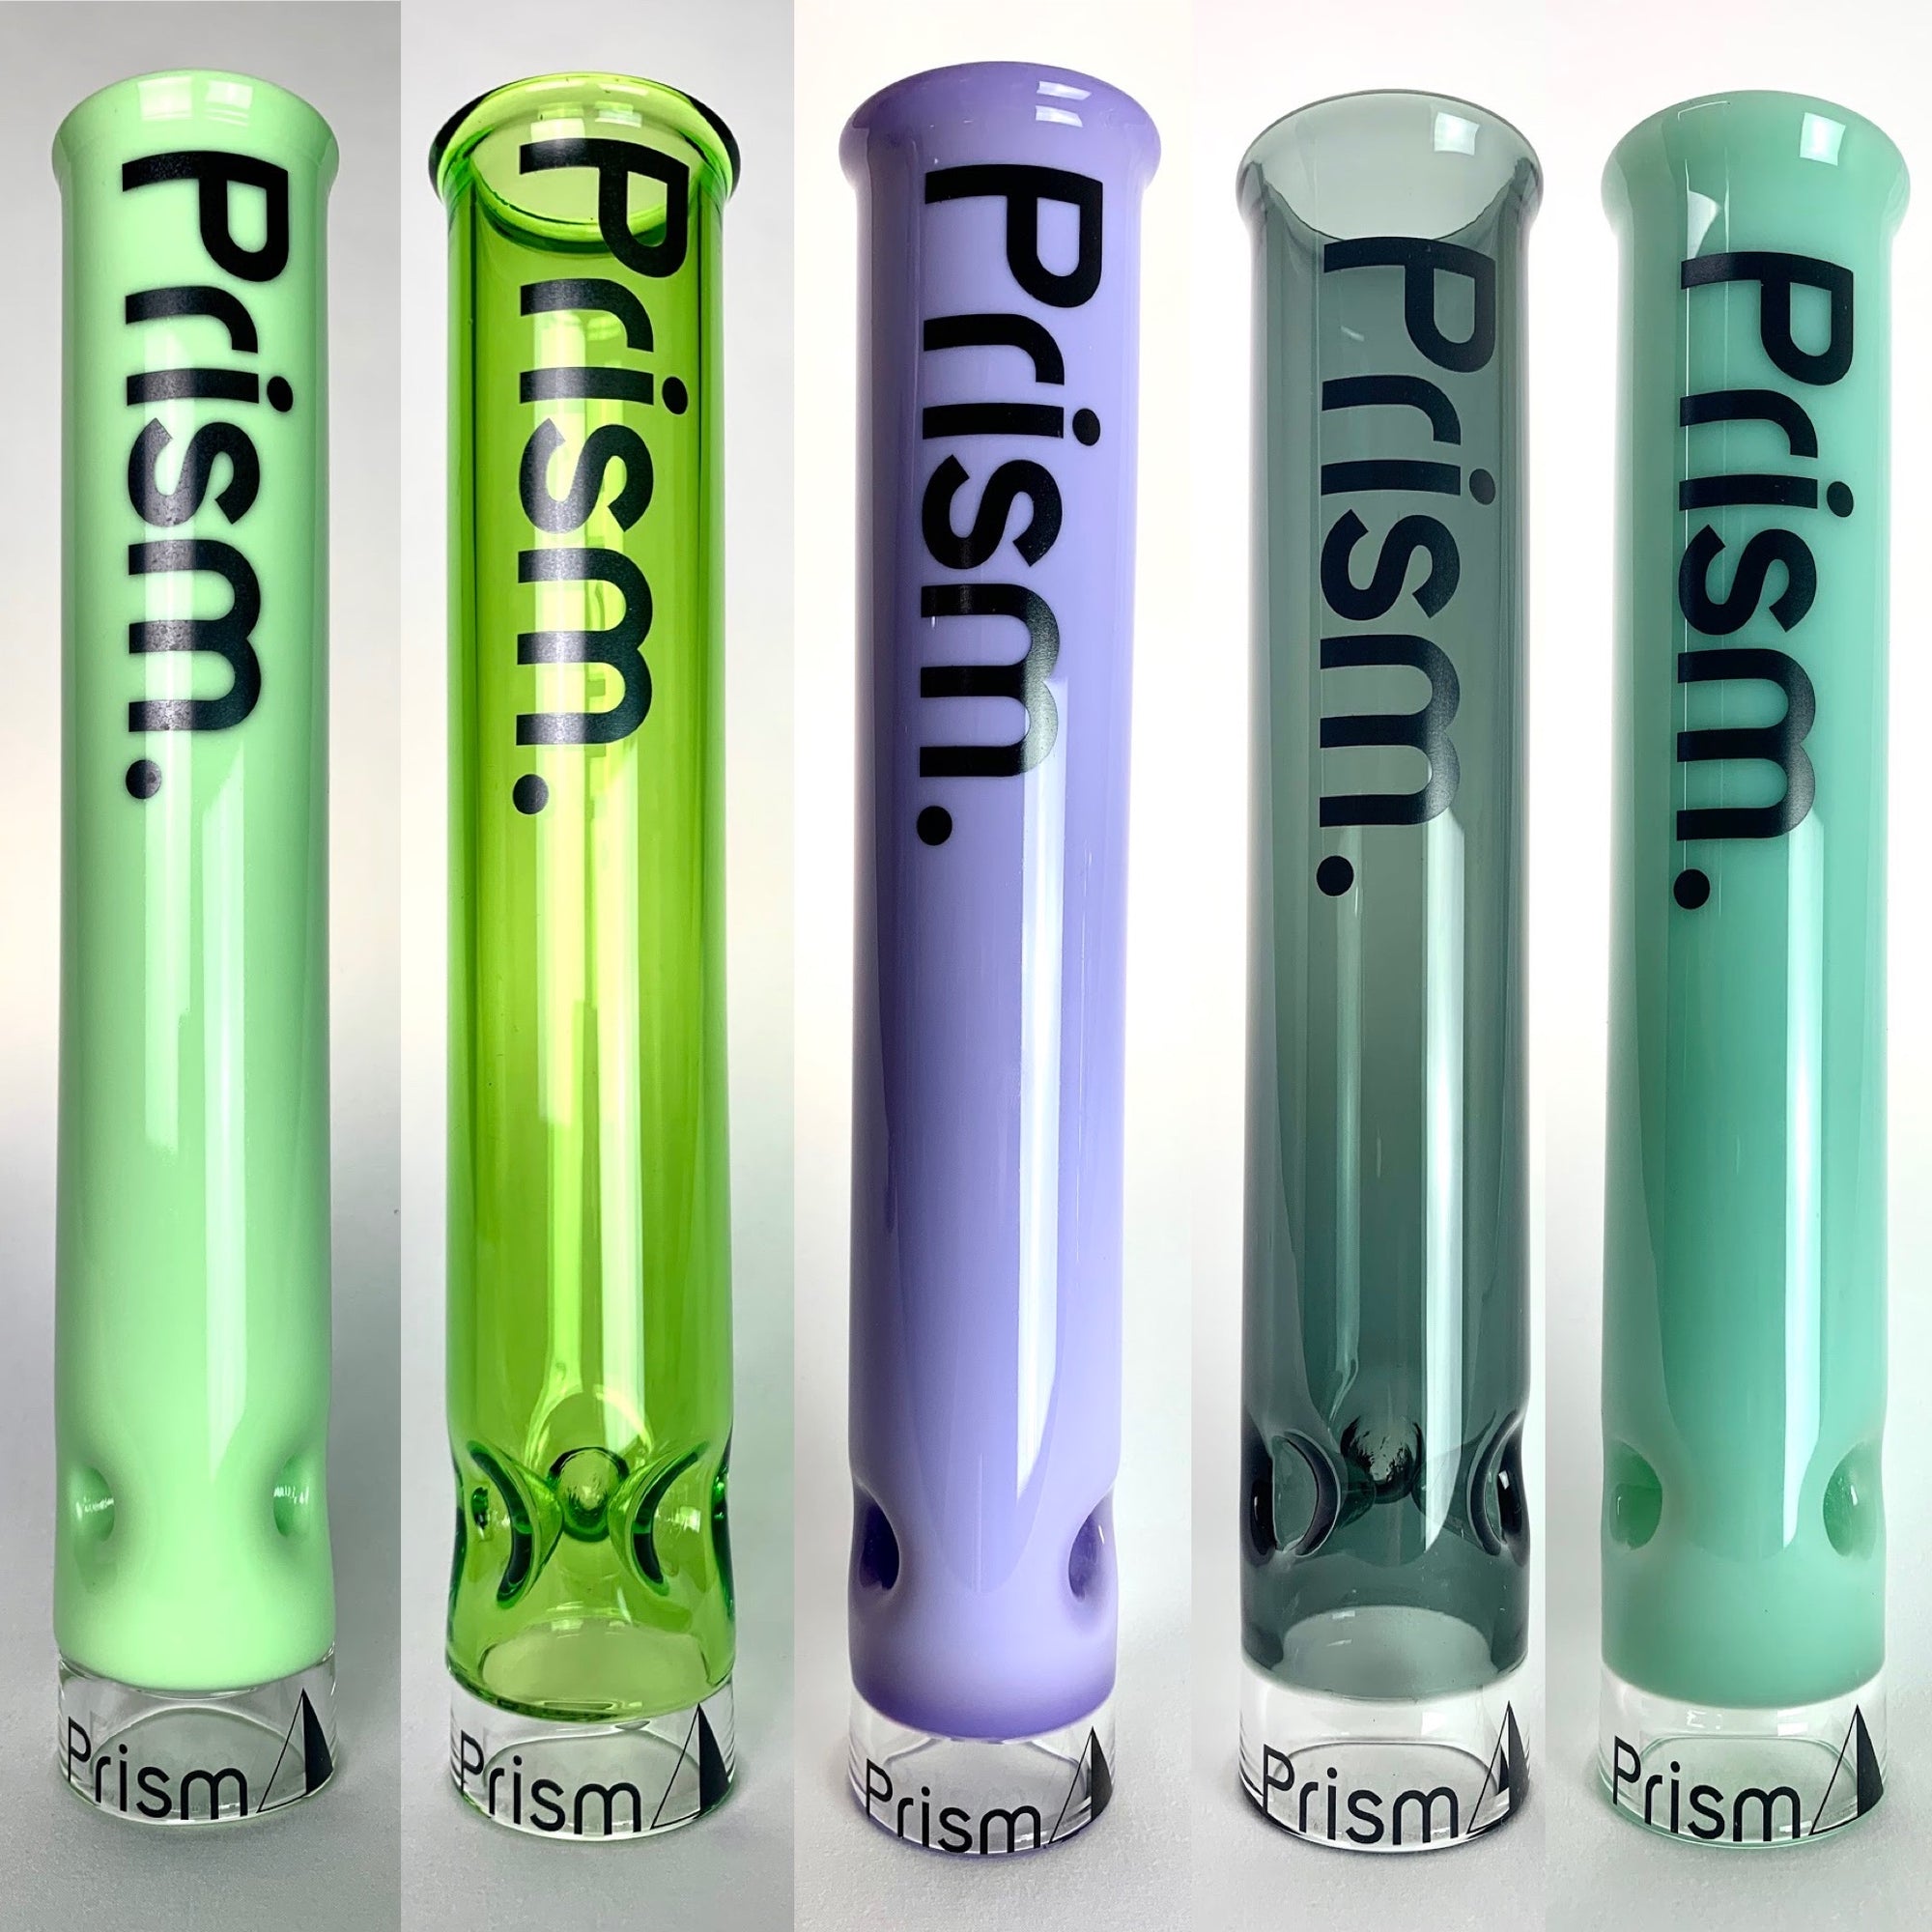 Five New Tall Colored Mouthpieces For Your Custom Bong